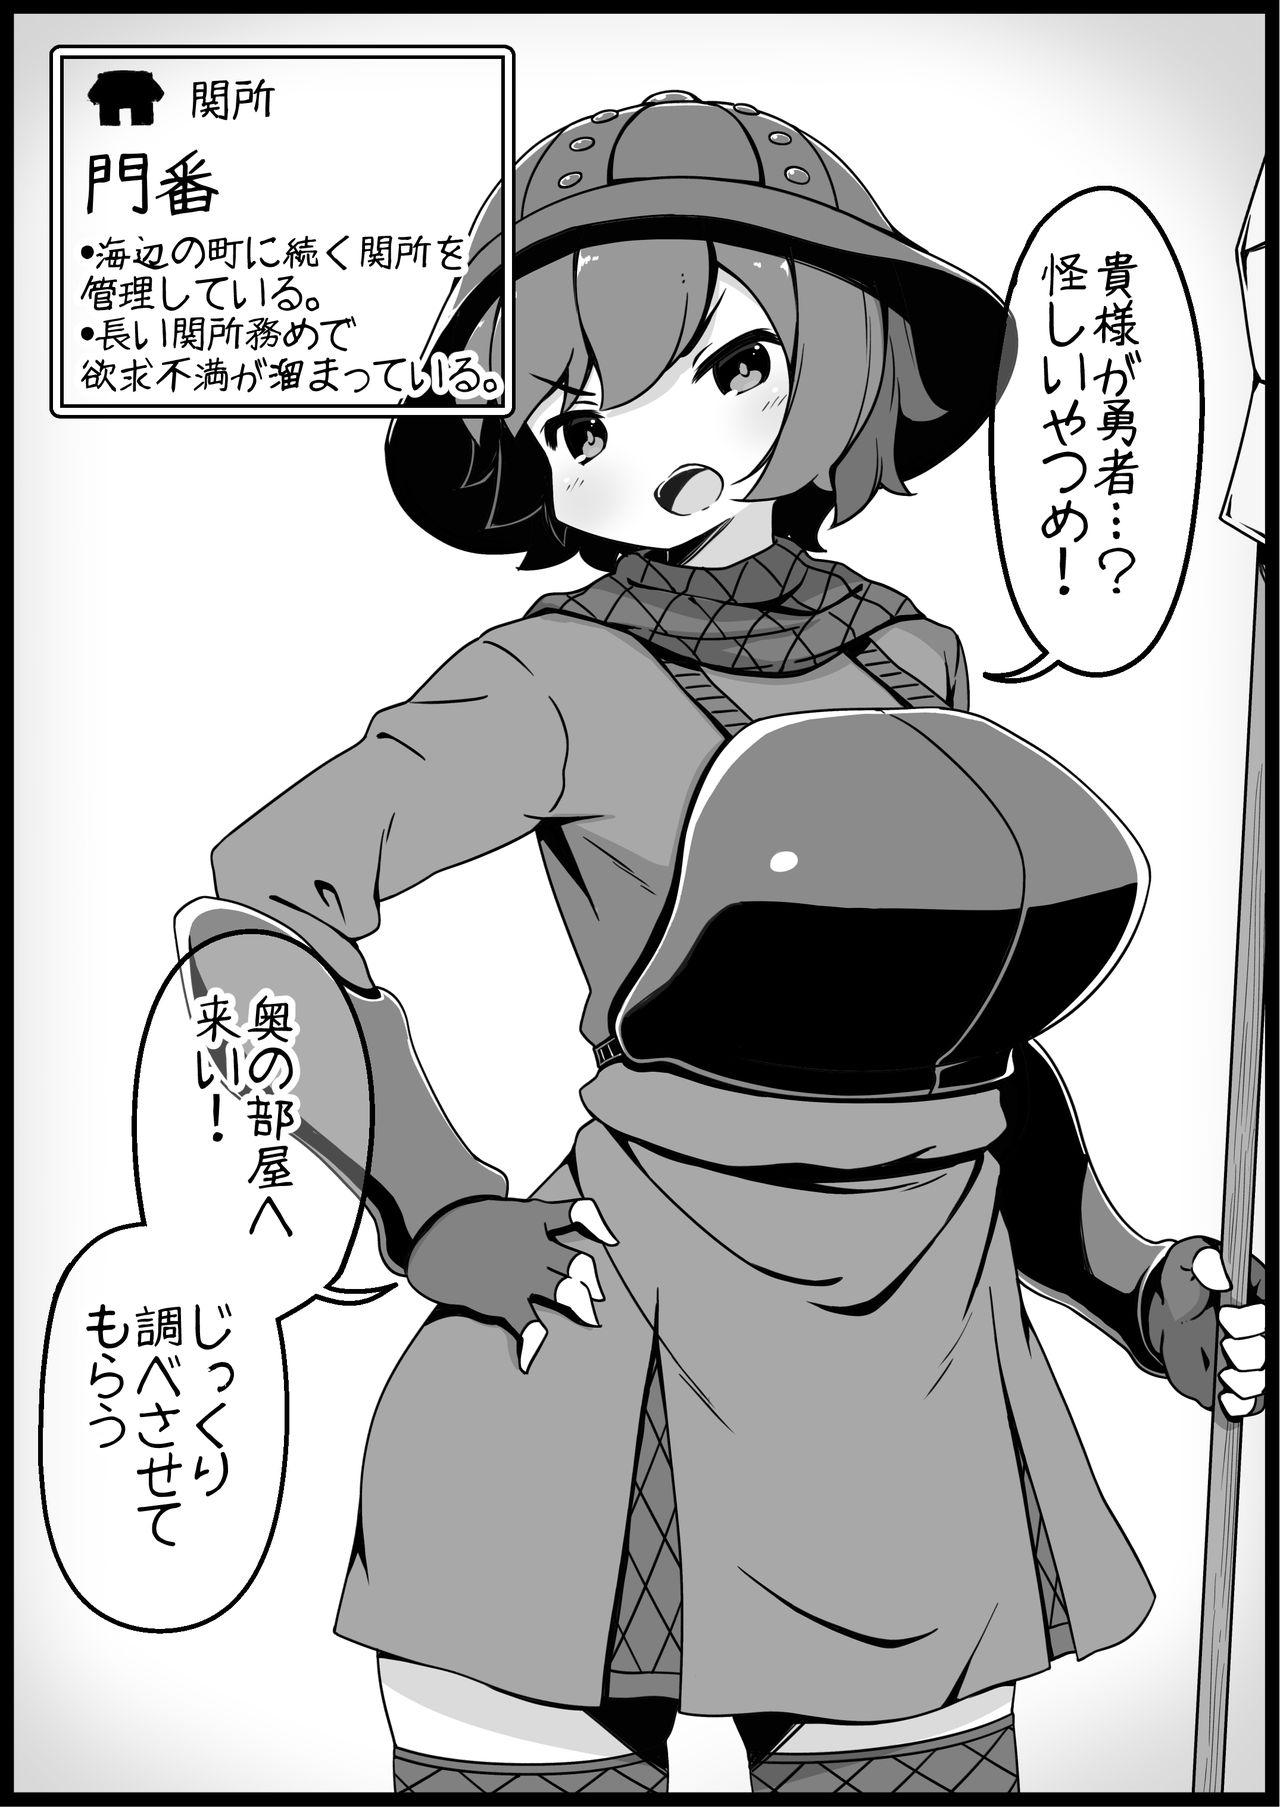 [Succubus Egg] Fantasy World 2 Too Forgiving to Heroes-Continued NPC (mob) Opponent-Centered Short H Manga Collection- 7